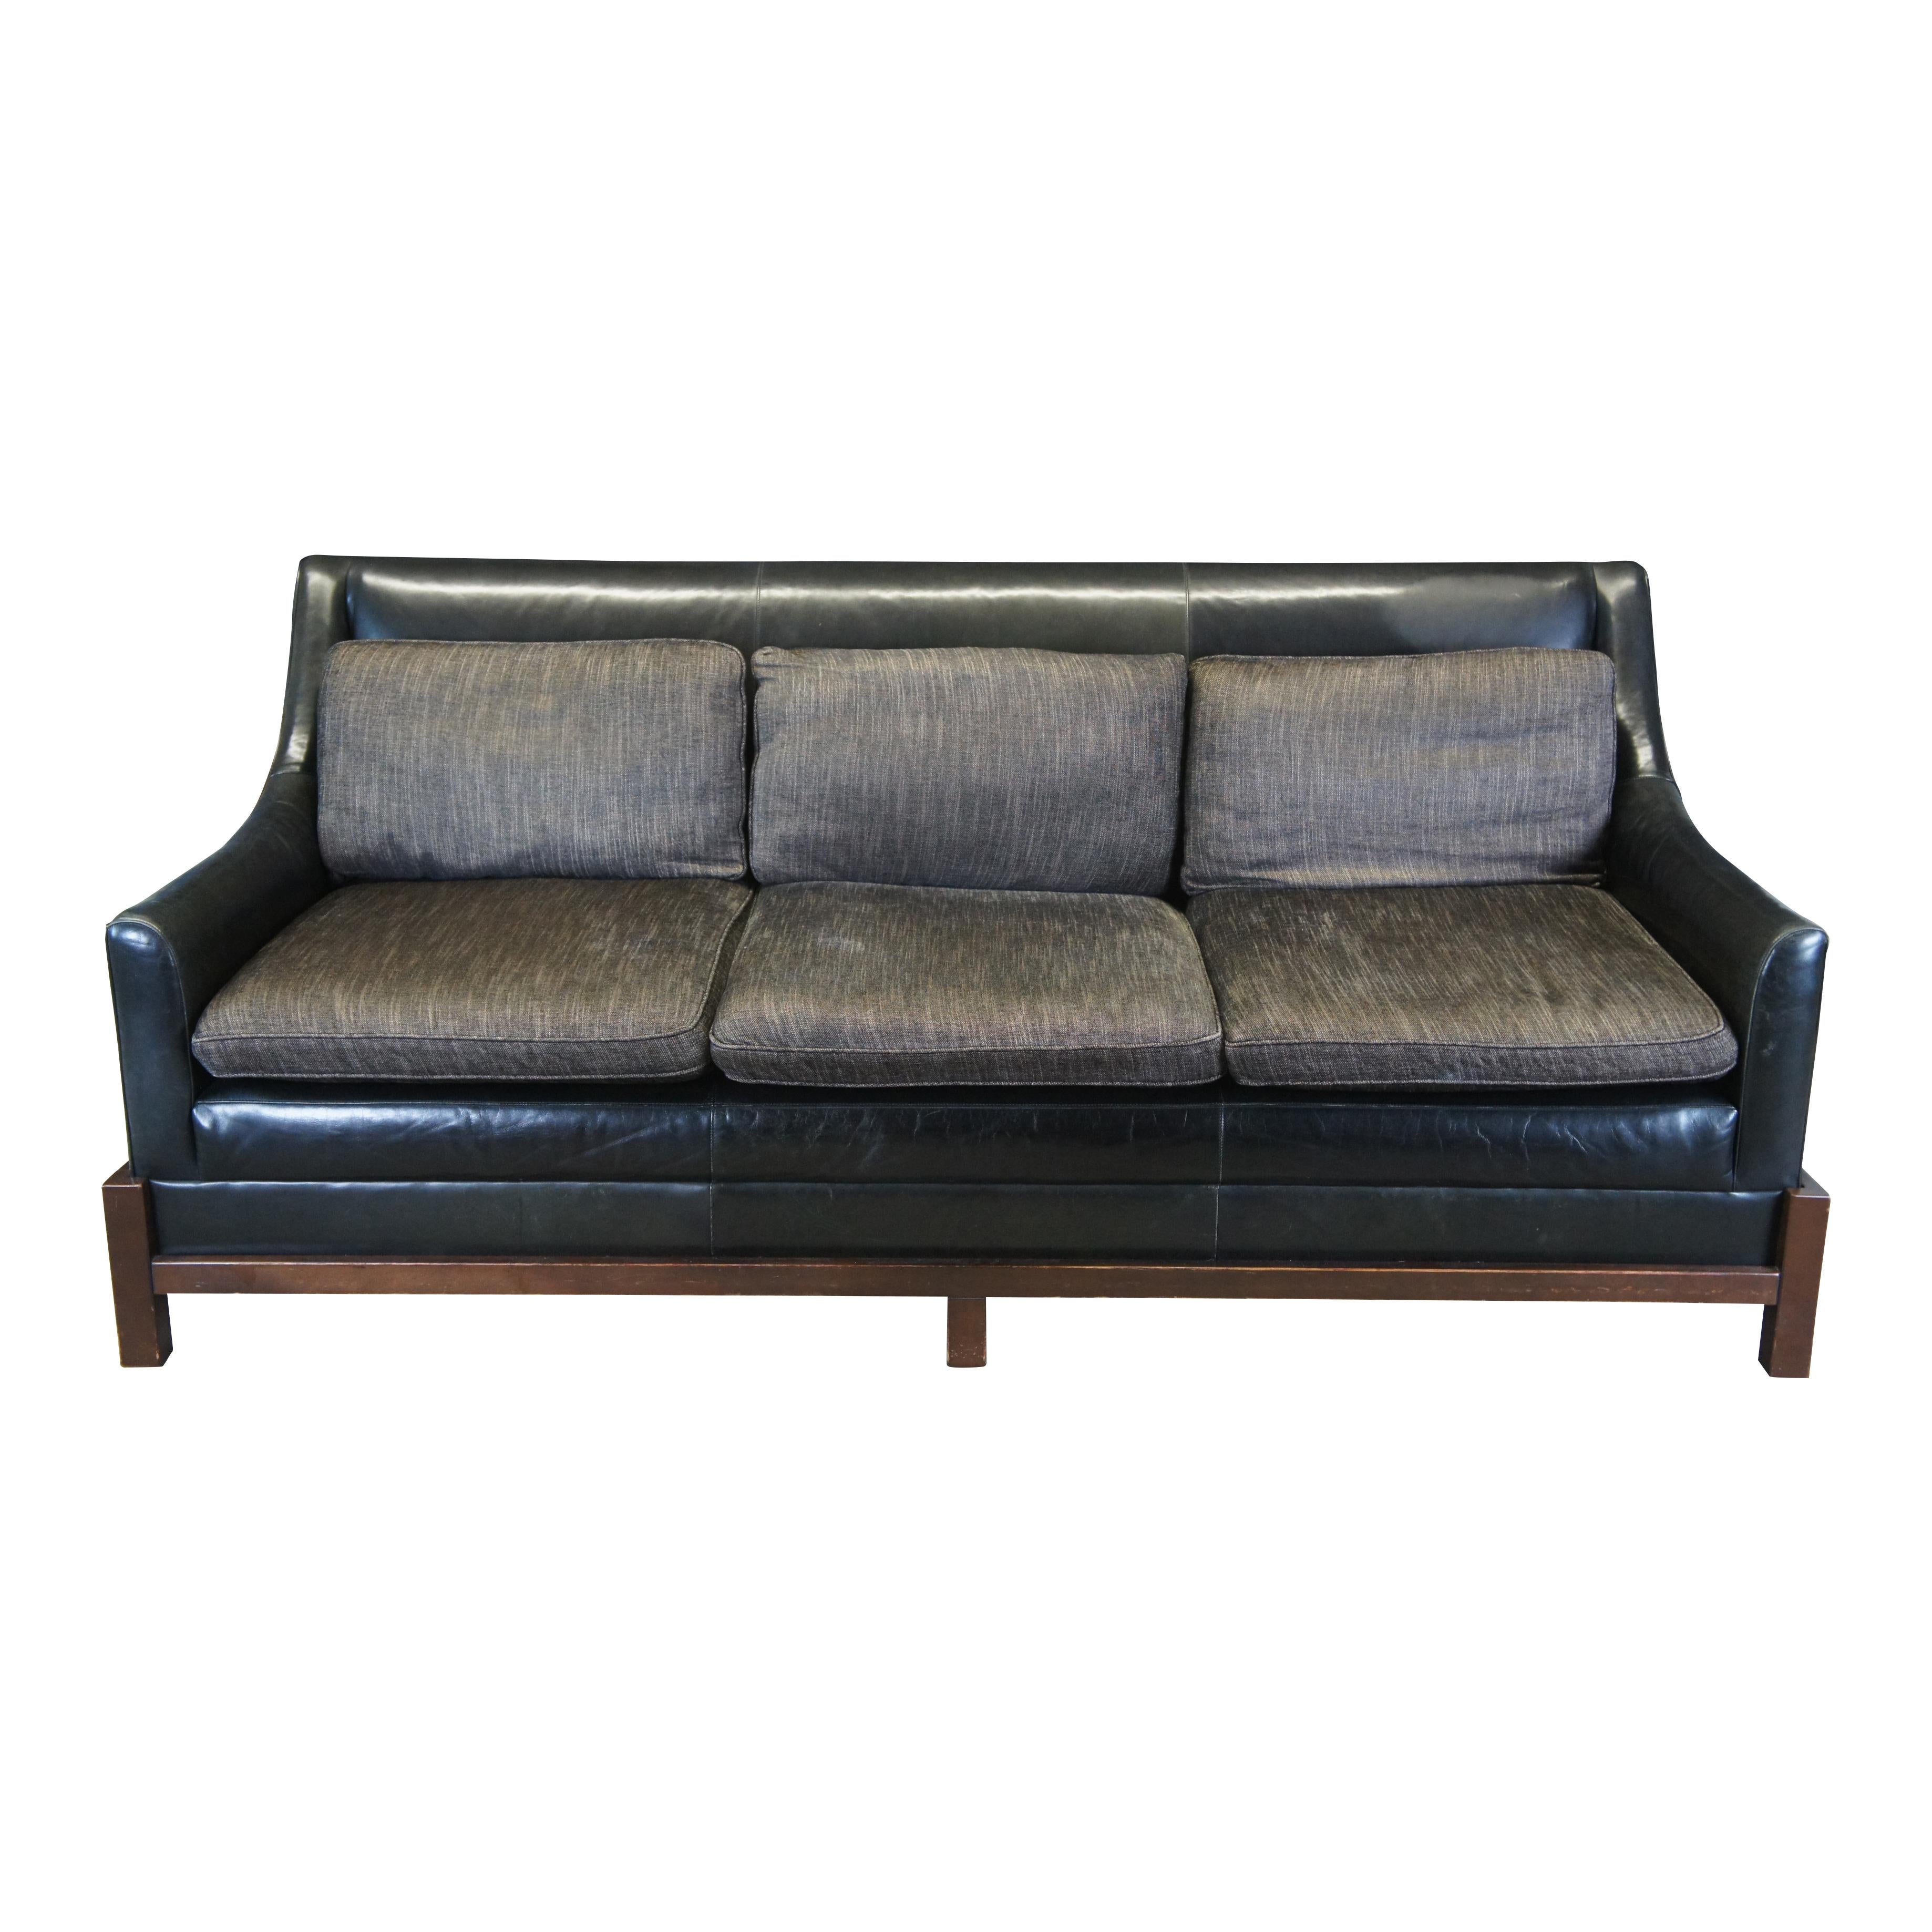 Laura Kirar for Baker Furniture Neue Sofa. Features a black leather frame with swoop arms on an espresso cradle. A three seat design with gray seat cushions and back rests. An elegant design that lends well in any modern setting.